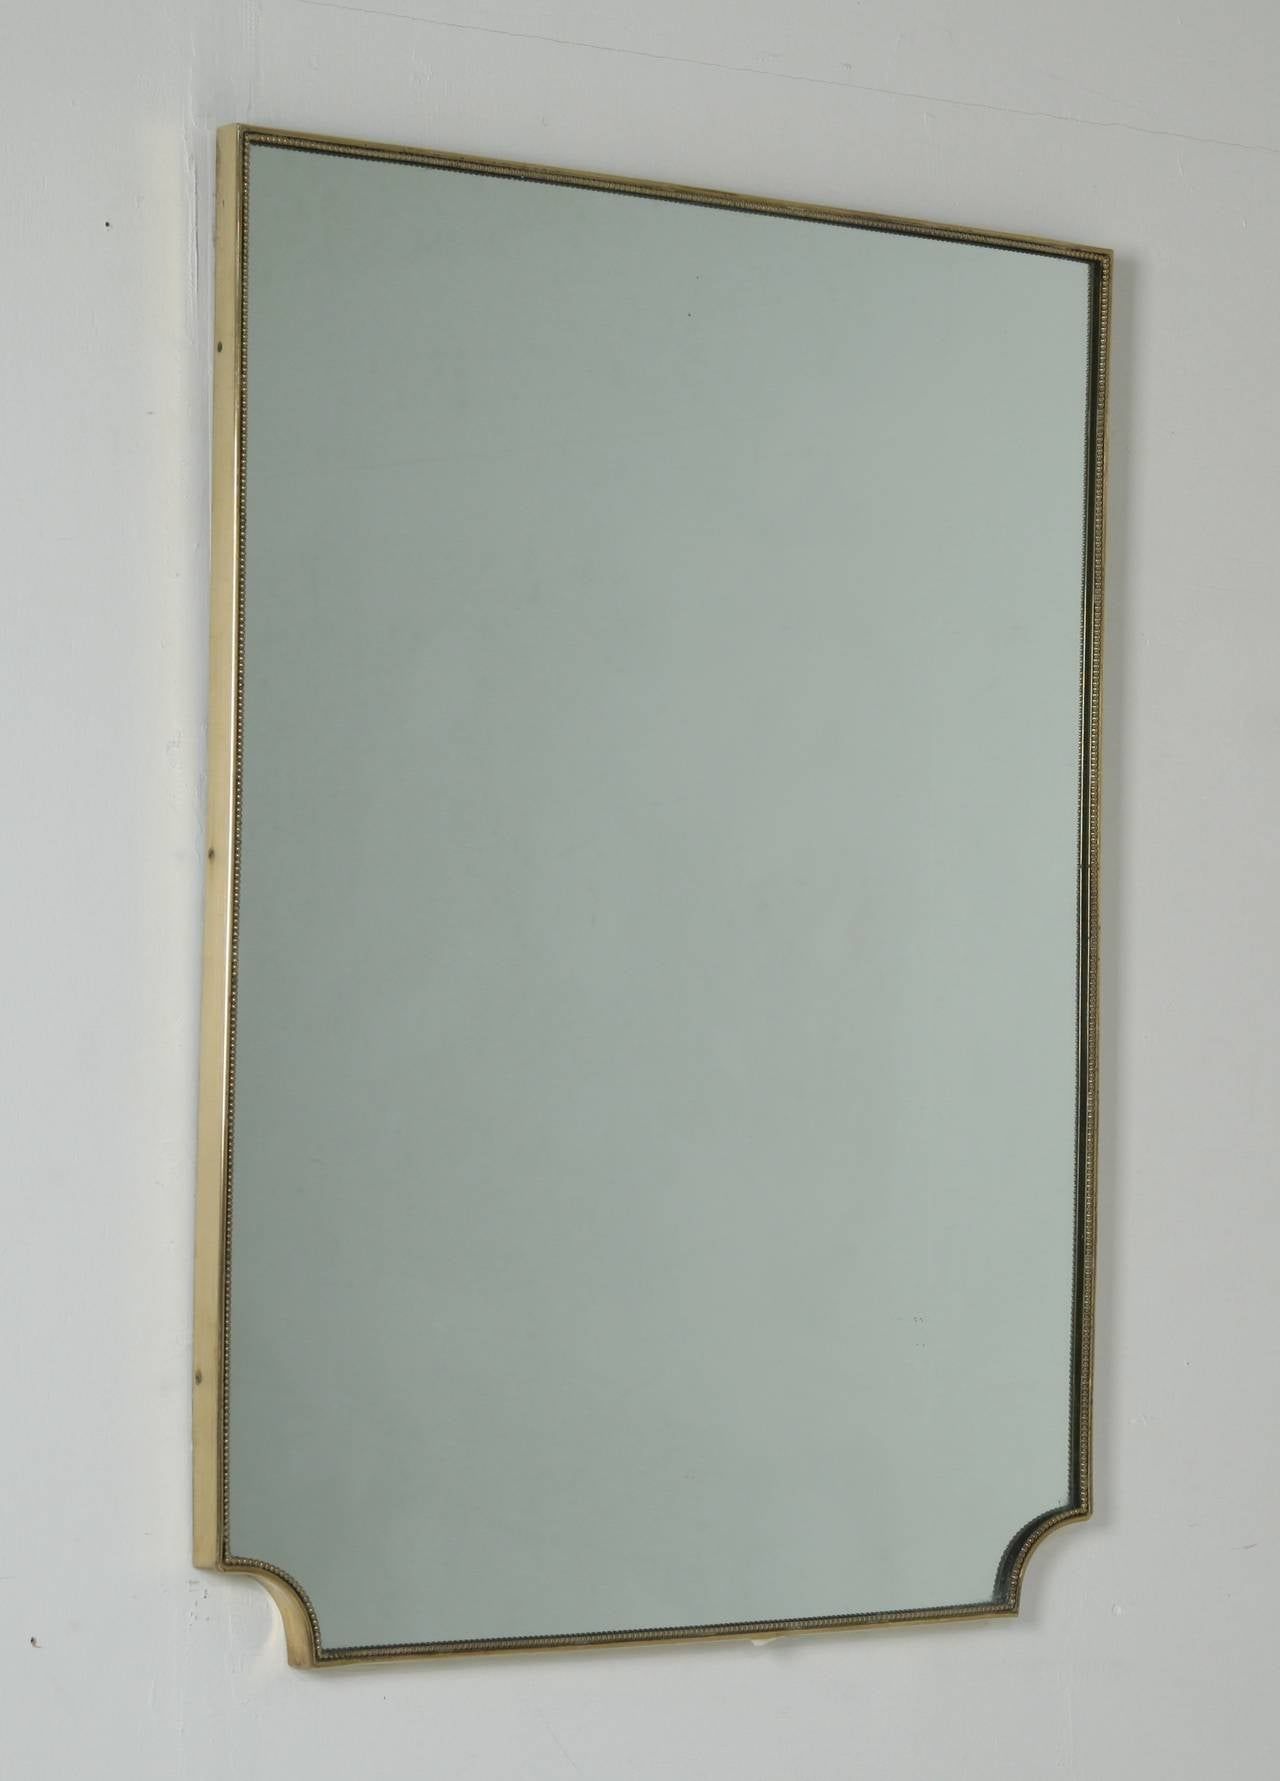 Italian 1950s Brass Framed Mirror At 1stdibs Throughout Brass Iron Framed Wall Mirrors (View 14 of 15)